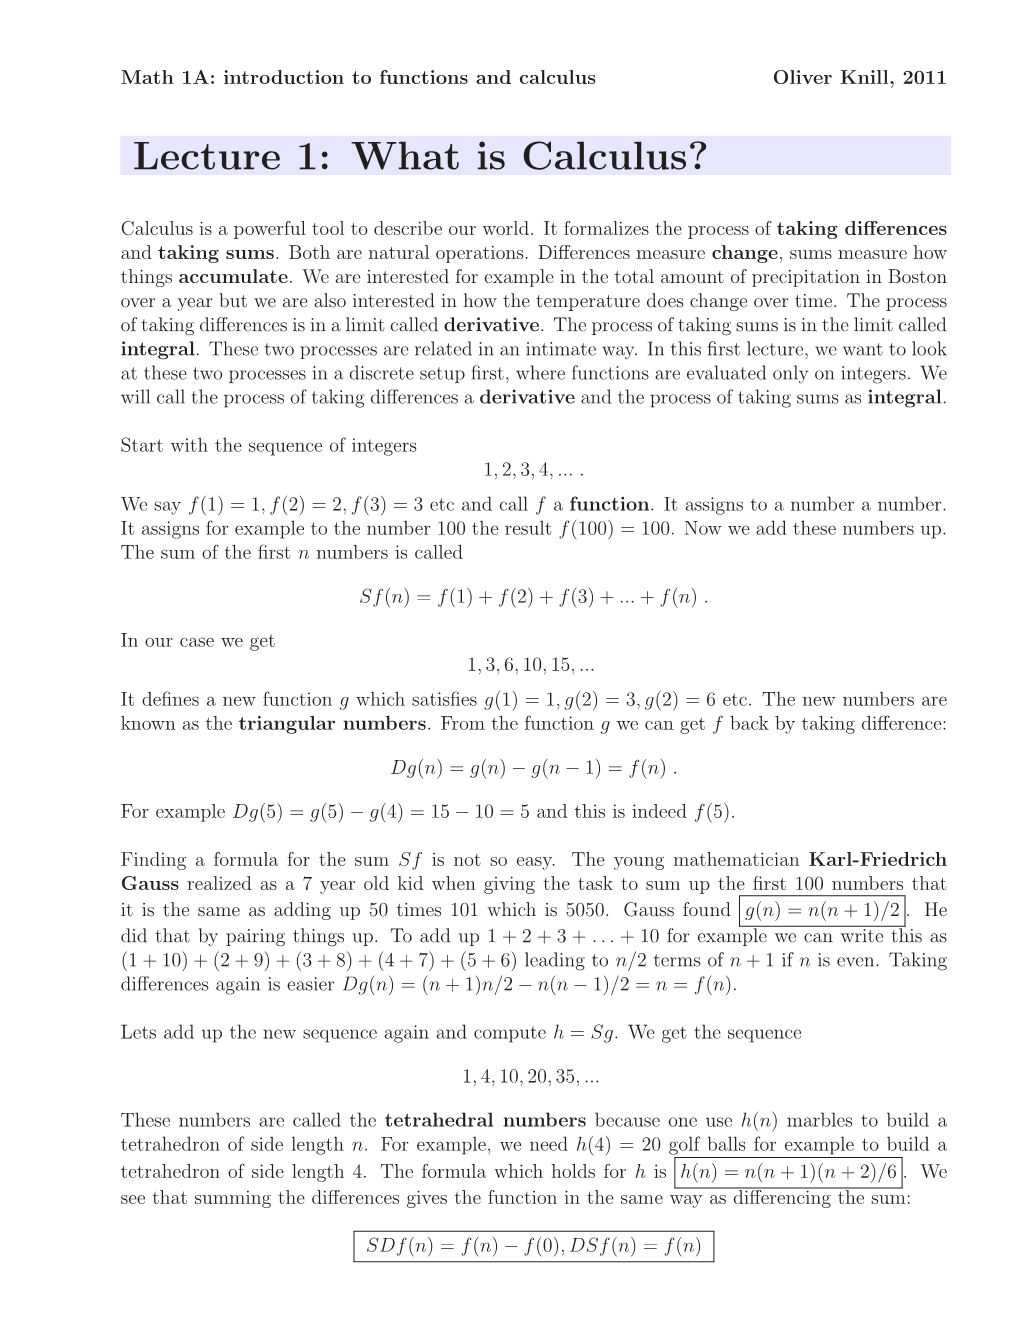 Lecture 1: What Is Calculus?